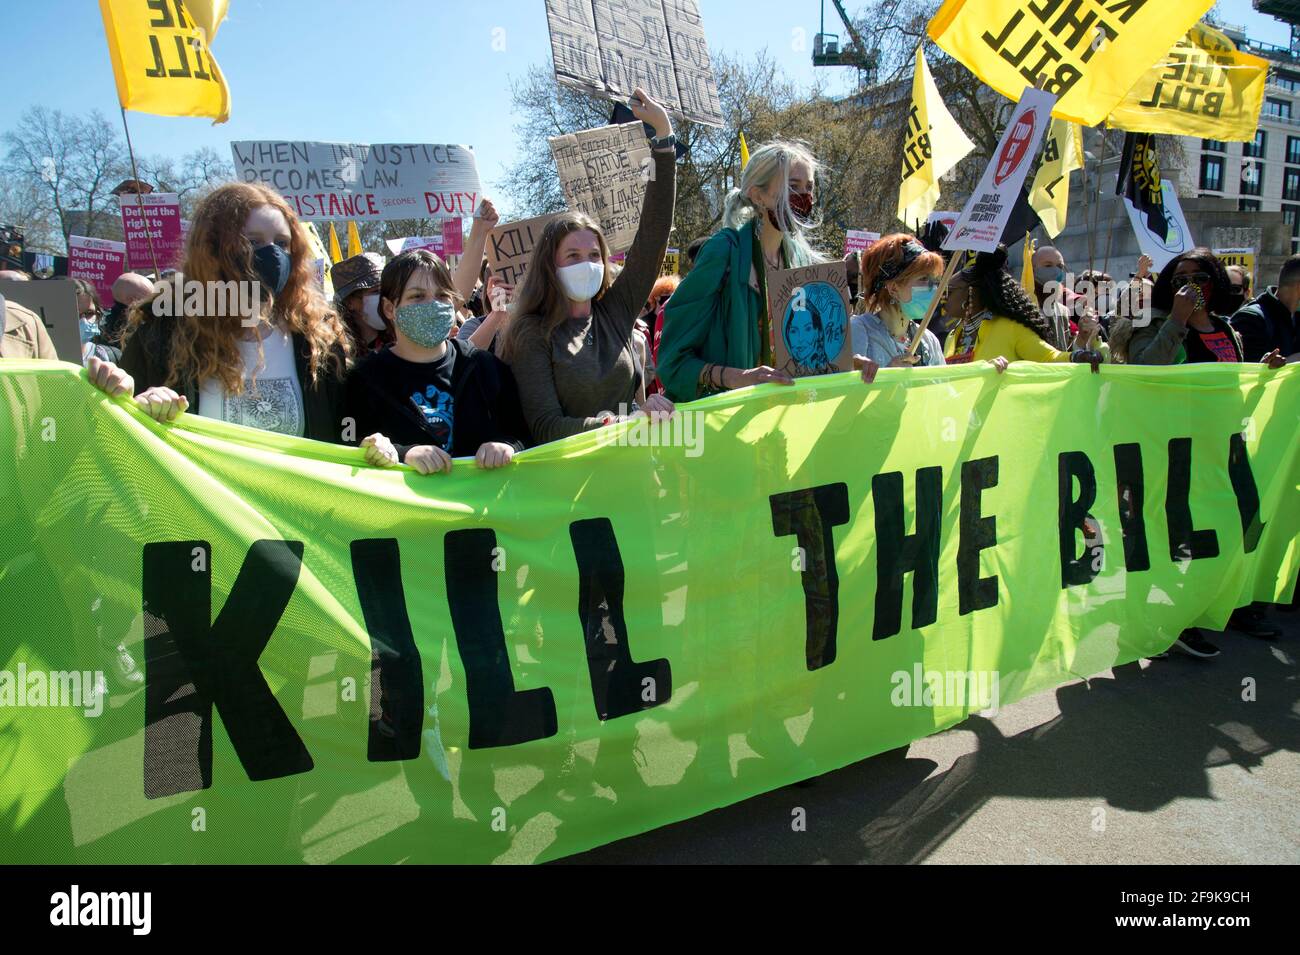 17.04.2021. Kill the Bill protest. Wellington Arch. A crowd of protesters wearing facemasks lead the march behind a banner saying 'Kill the Bill'. Stock Photo